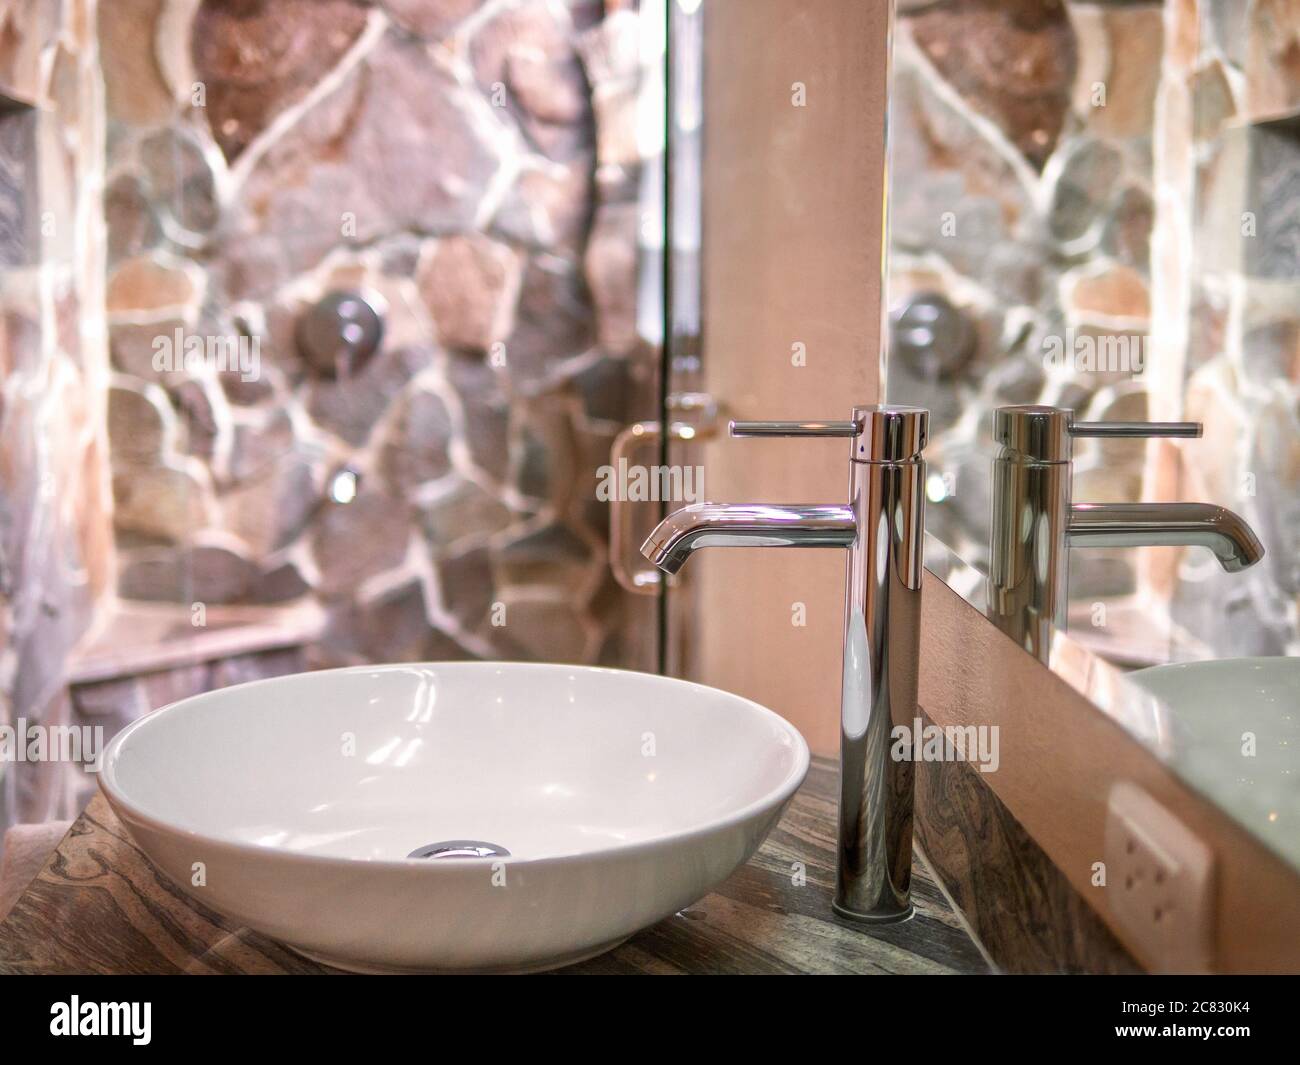 Close up view of a single white ceramic basin, polished chrome faucet, and mirror in a luxury hotel bathroom with a natural stone shower stall. Stock Photo